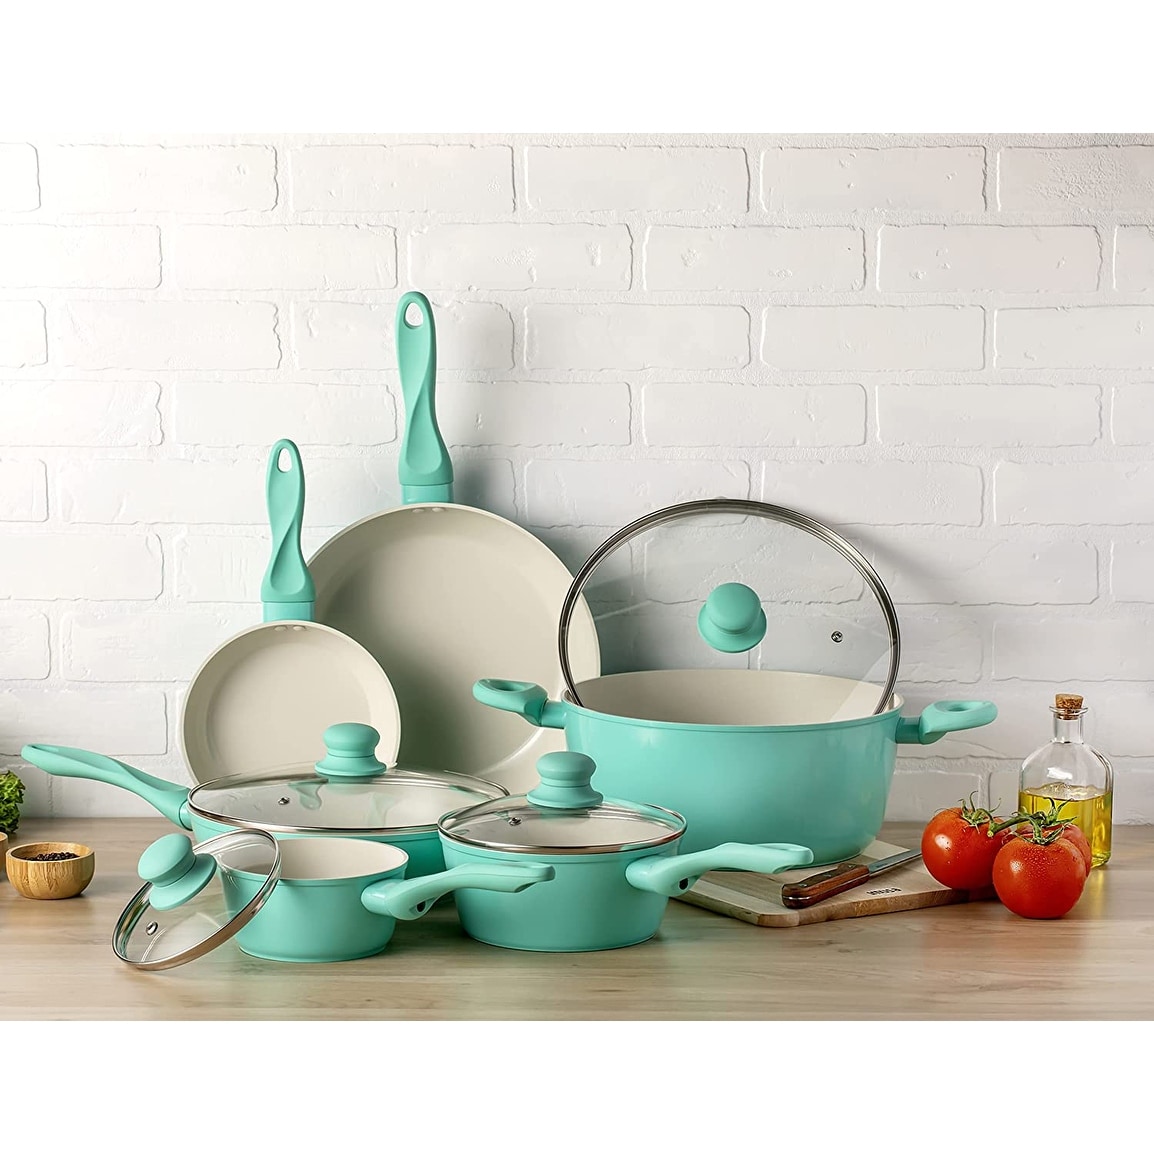 https://ak1.ostkcdn.com/images/products/is/images/direct/3657a0c42100e5e1dcee7ef7c03cd5fd8103ac85/USA-10pc-Forged-Nonstick-white-Interior-Ceramic-Teal-Cookware-Set.jpg